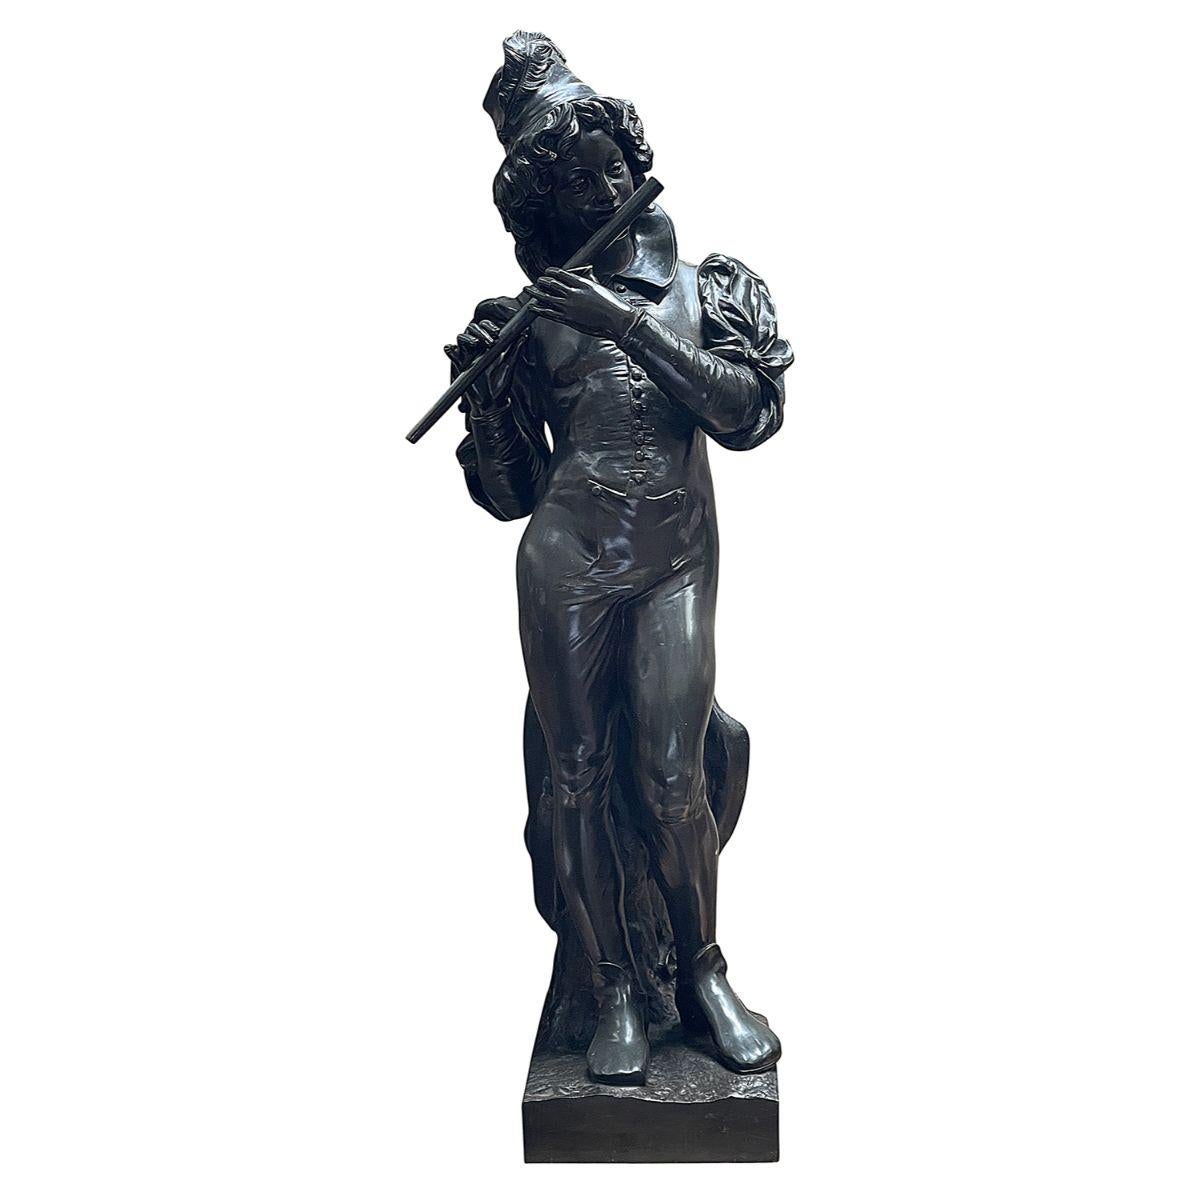 A large and impressive pair of mid 19th Century Venetian style bronze musicians playing a flute and mandolin, each in traditional hats and clothing.
Batch 73 60823 YTKZ